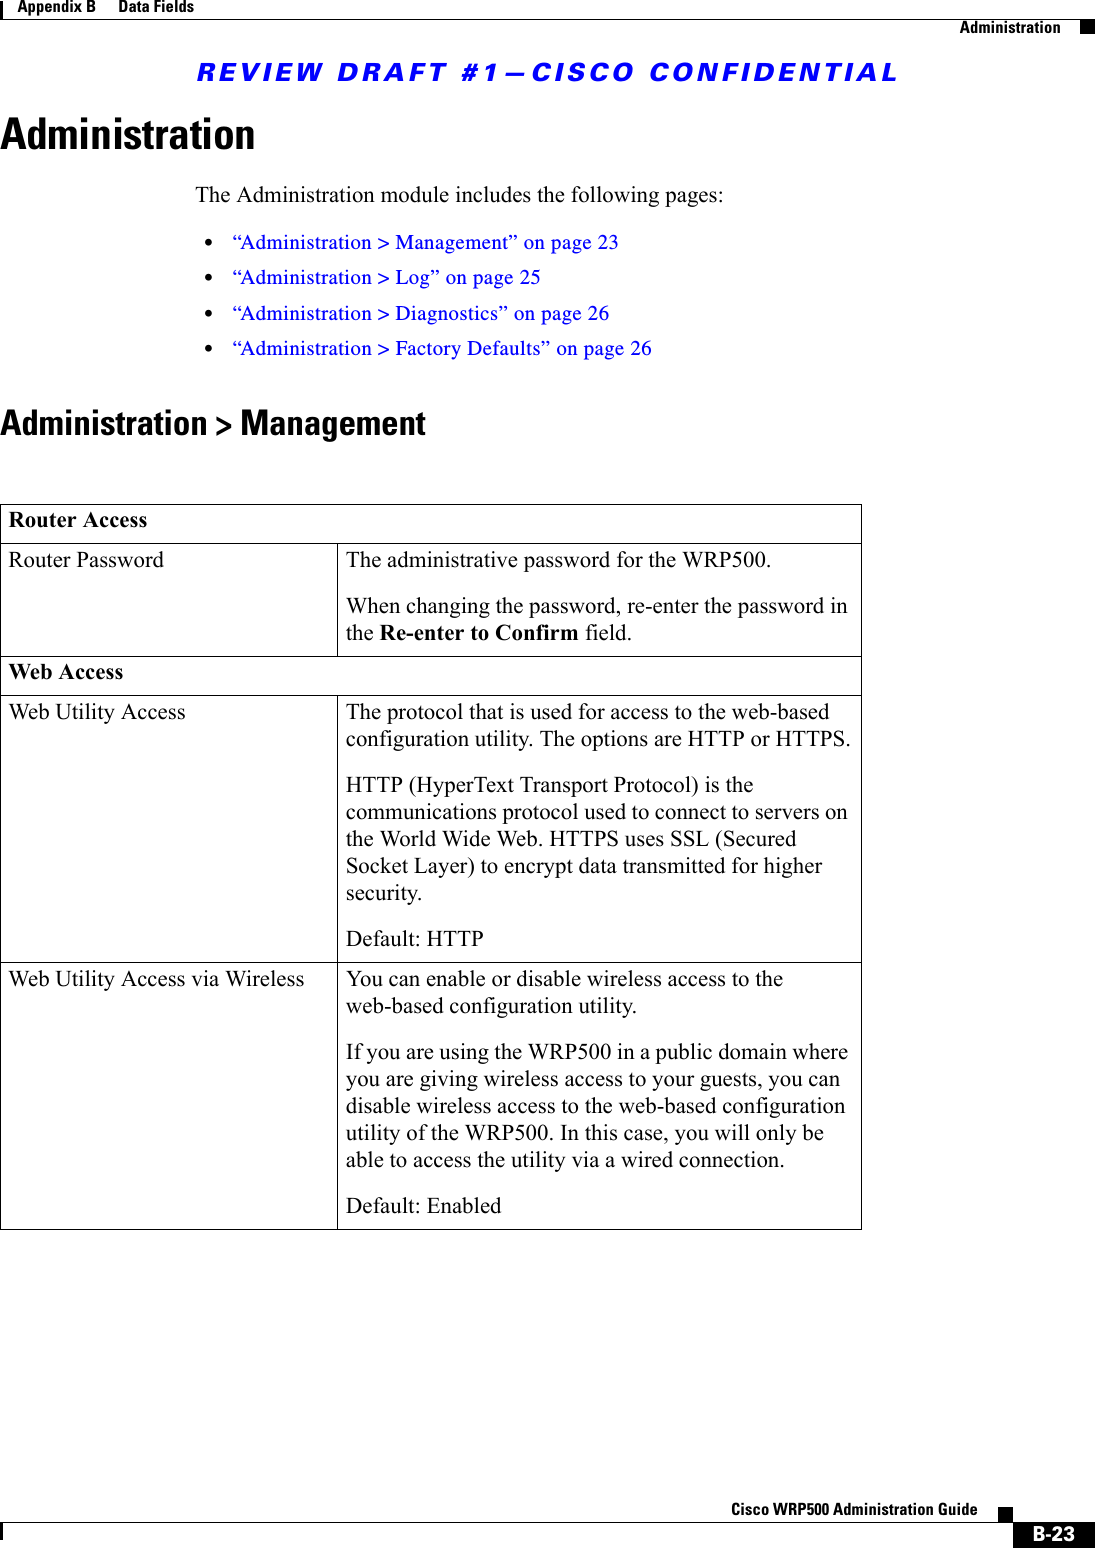 REVIEW DRAFT #1—CISCO CONFIDENTIALB-23Cisco WRP500 Administration Guide Appendix B      Data Fields  AdministrationAdministrationThe Administration module includes the following pages:•“Administration &gt; Management” on page 23•“Administration &gt; Log” on page 25•“Administration &gt; Diagnostics” on page 26•“Administration &gt; Factory Defaults” on page 26Administration &gt; ManagementRouter AccessRouter Password The administrative password for the WRP500.When changing the password, re-enter the password in the Re-enter to Confirm field.Web AccessWeb Utility Access The protocol that is used for access to the web-based configuration utility. The options are HTTP or HTTPS.HTTP (HyperText Transport Protocol) is the communications protocol used to connect to servers on the World Wide Web. HTTPS uses SSL (Secured Socket Layer) to encrypt data transmitted for higher security.Default: HTTPWeb Utility Access via Wireless You can enable or disable wireless access to the web-based configuration utility. If you are using the WRP500 in a public domain where you are giving wireless access to your guests, you can disable wireless access to the web-based configuration utility of the WRP500. In this case, you will only be able to access the utility via a wired connection.Default: Enabled